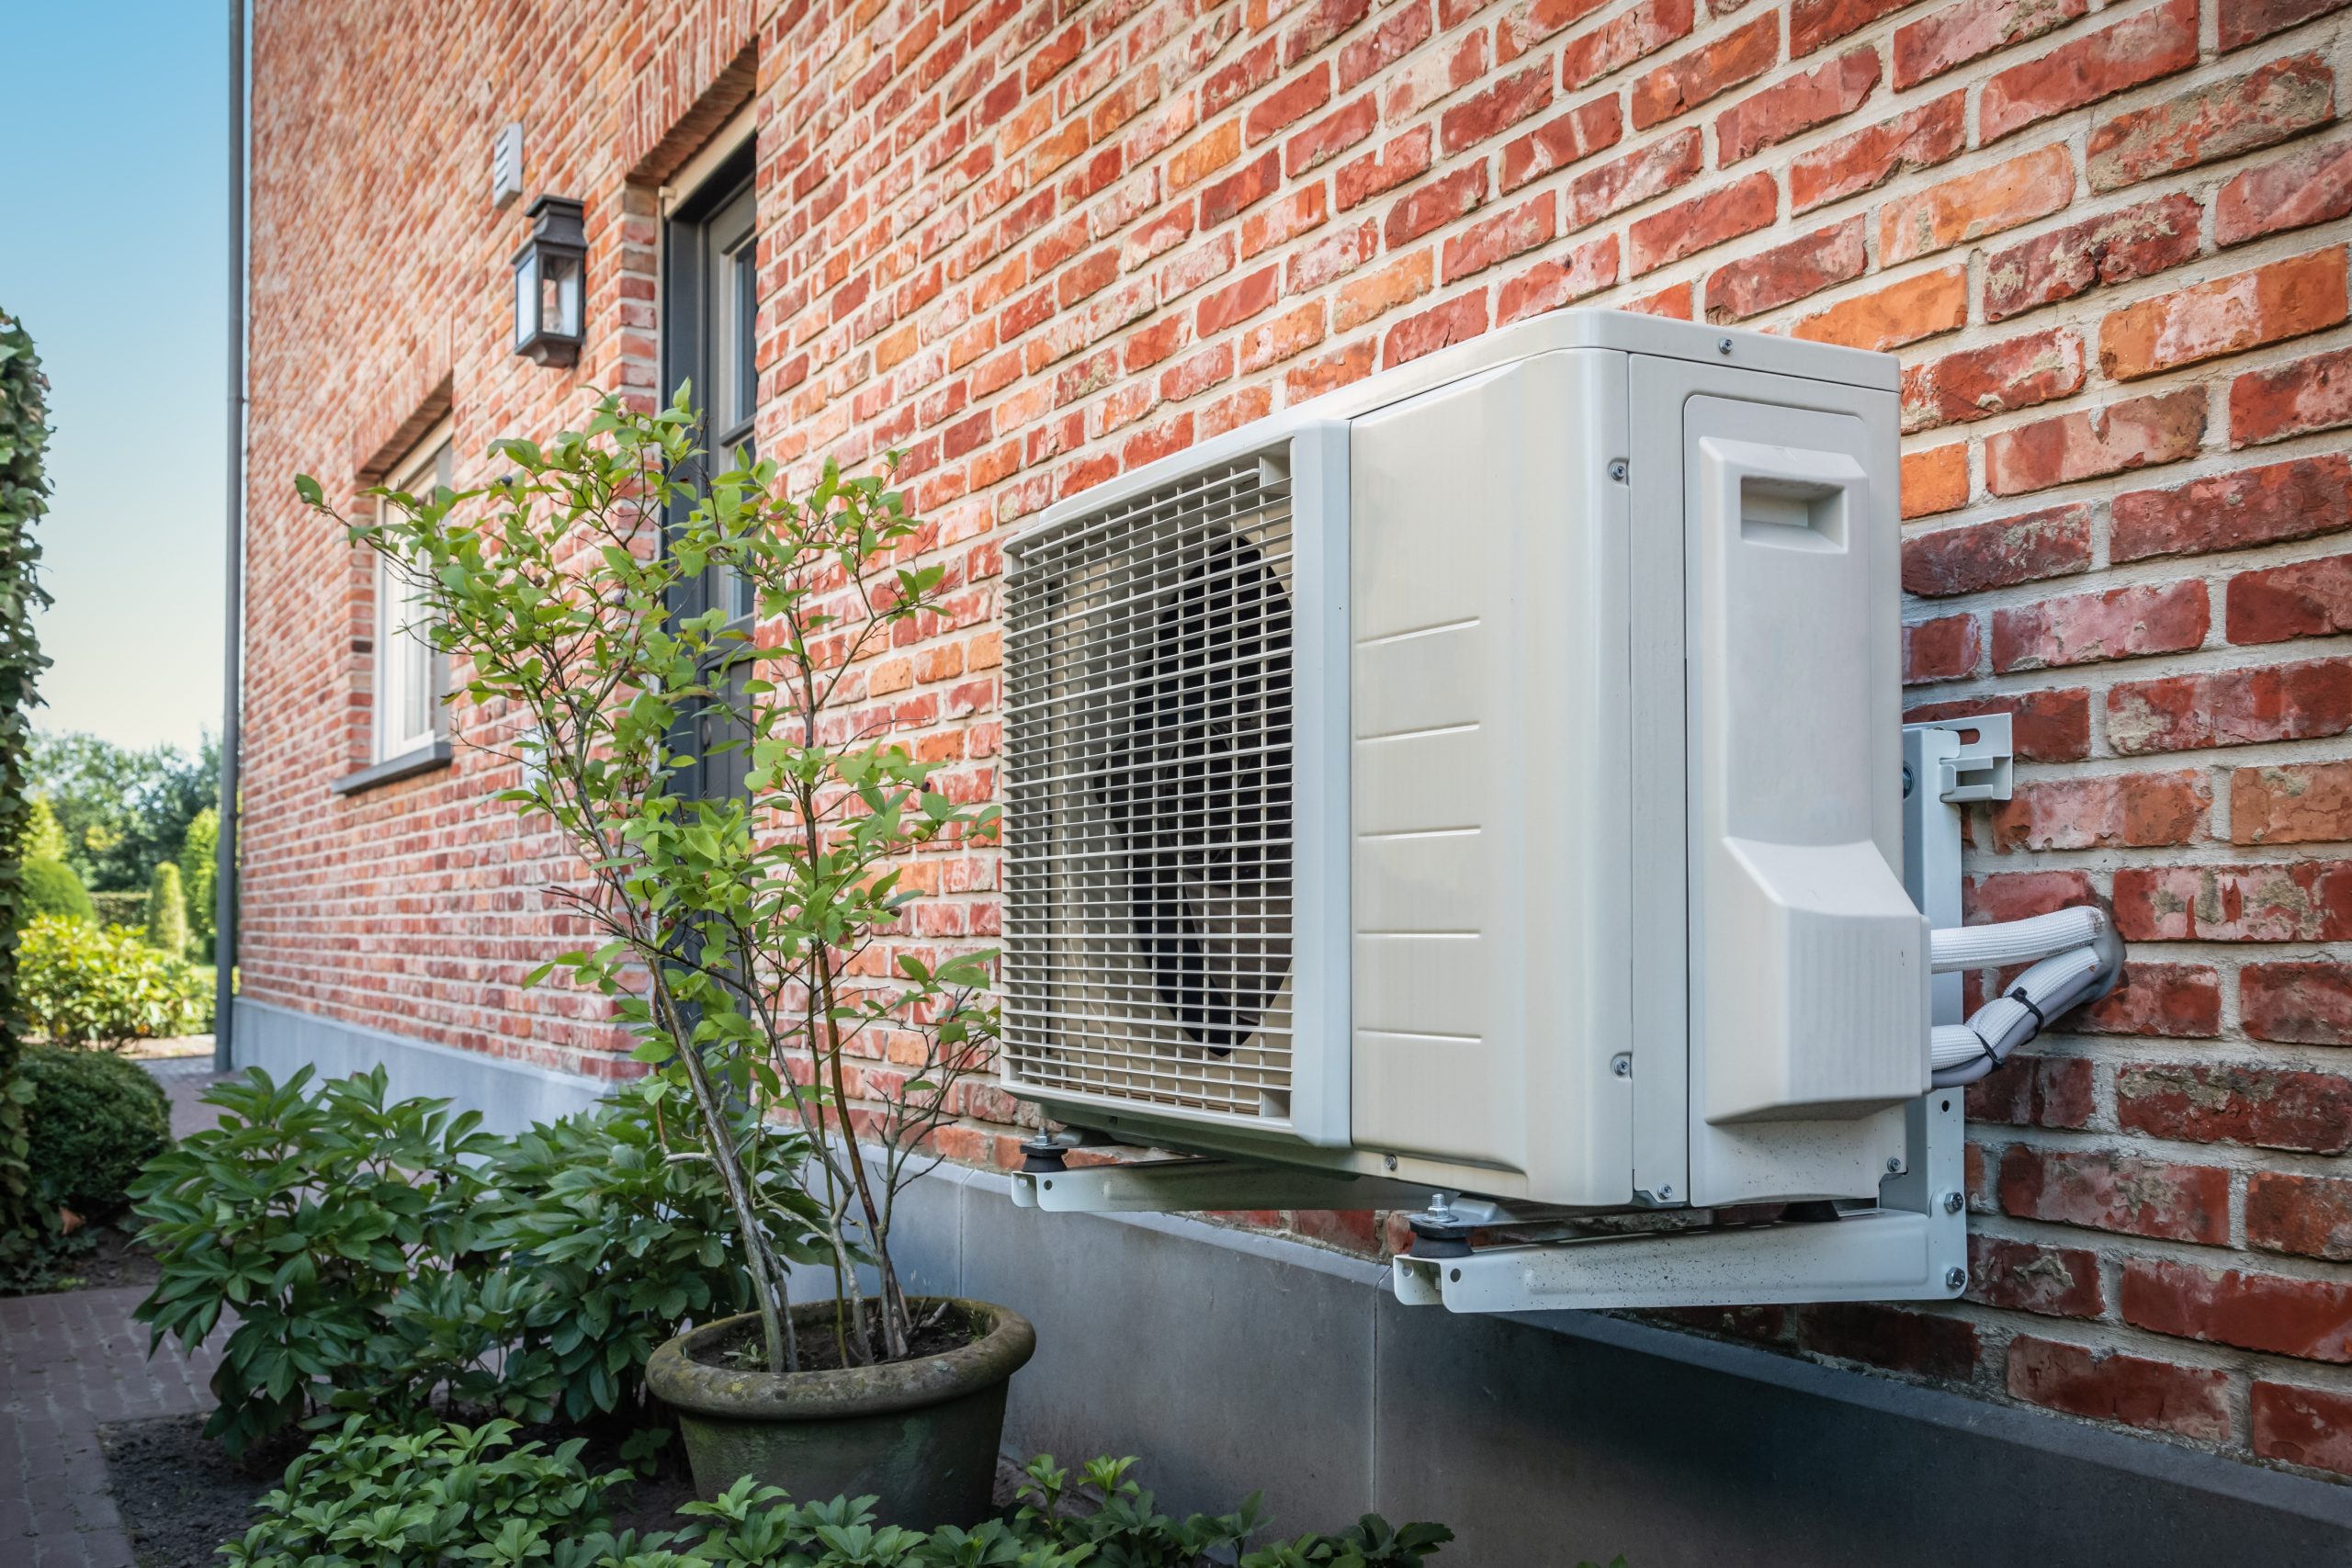 Outdoor heat pump unit attached to a brick wall